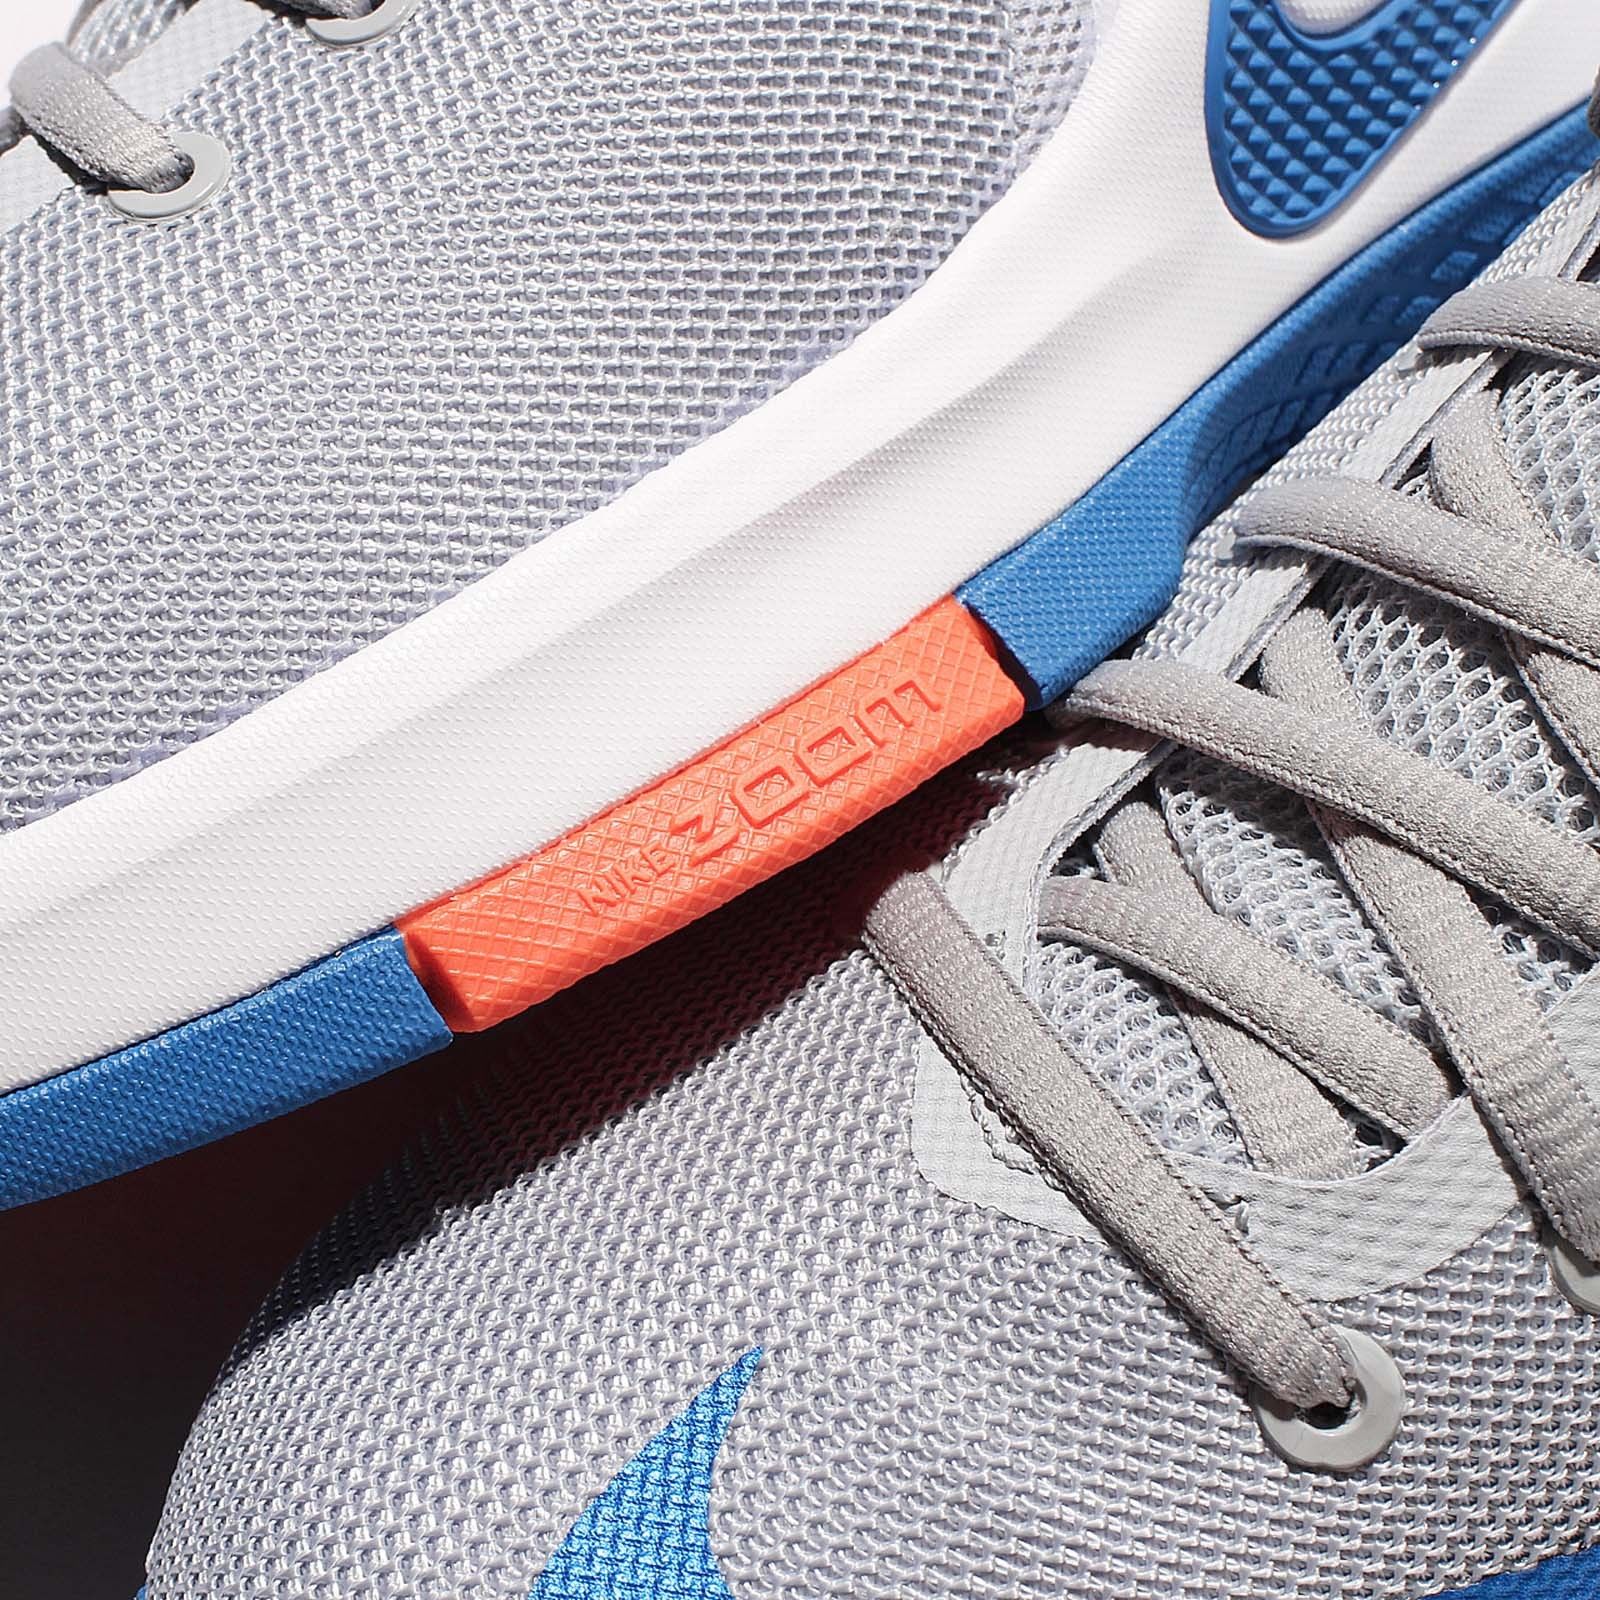 Get Your Hands on the New Nike Zoom Witness | Available Now - WearTesters